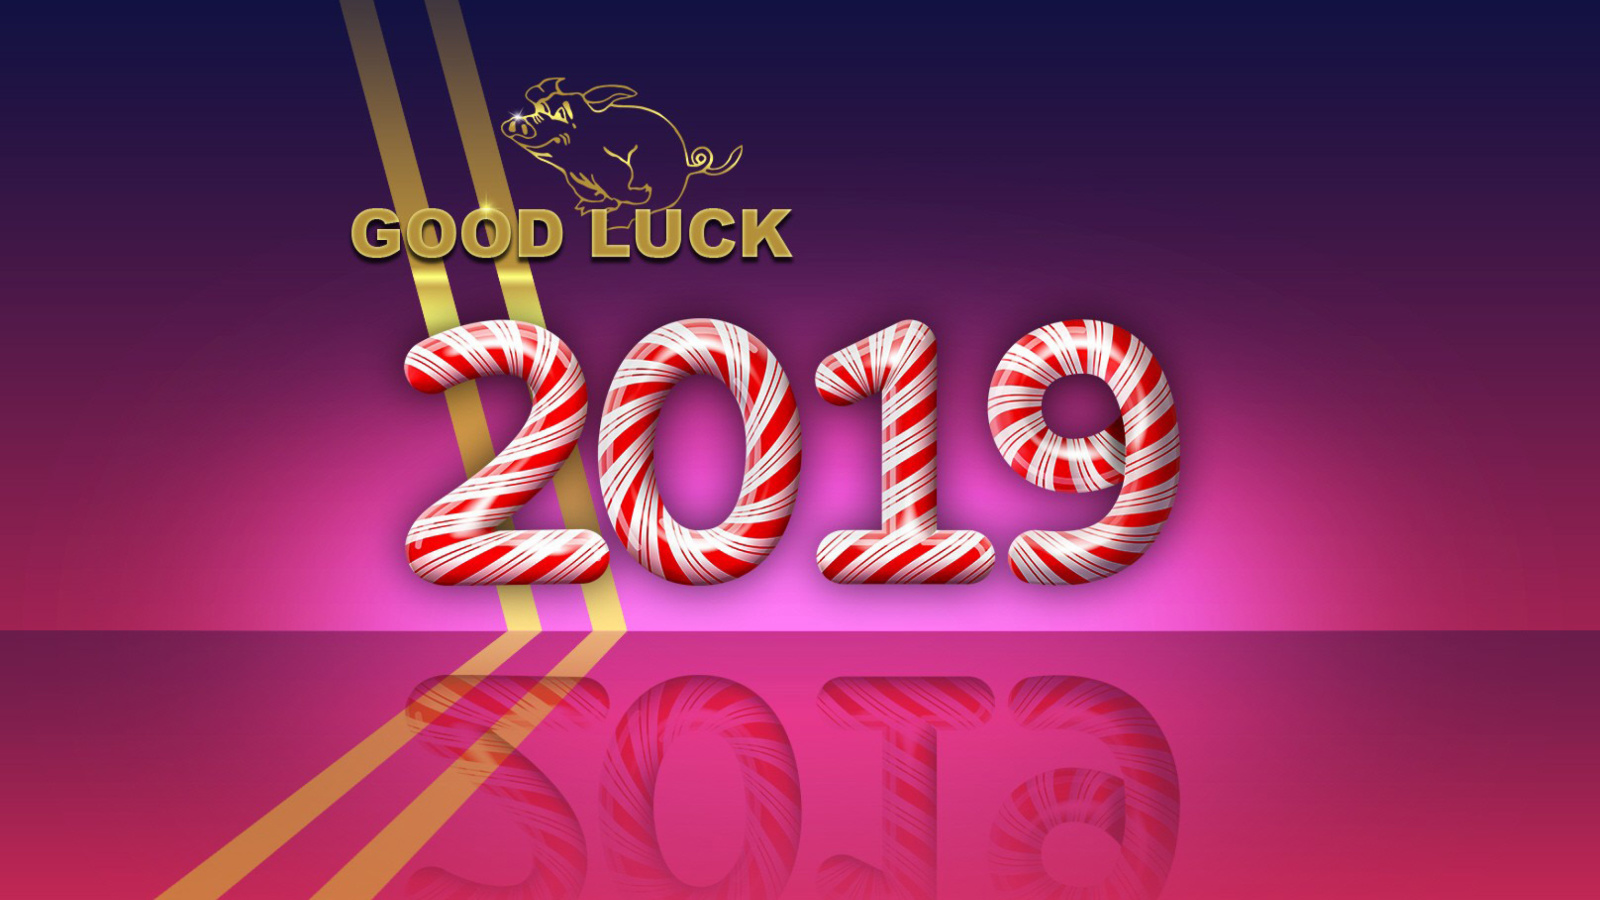 Good Luck in New Year 2019 wallpaper 1600x900